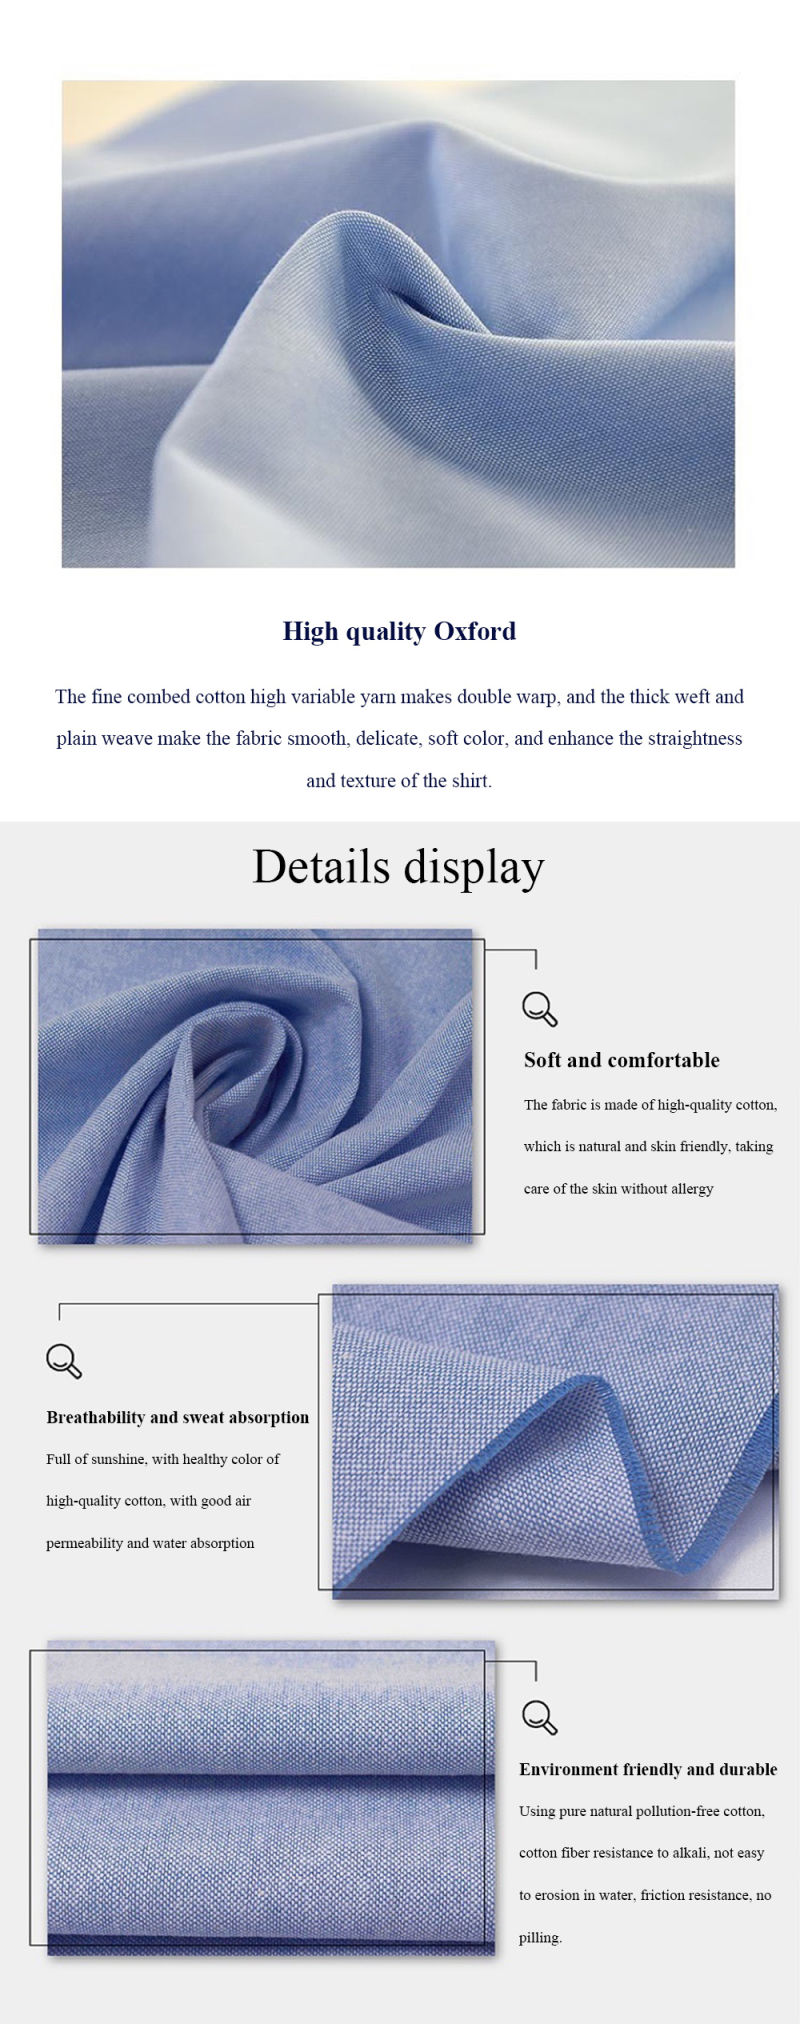 Fabric Oxford Oxford Linen Fabric High Quality Upholstery Fabric Oxford Fabric